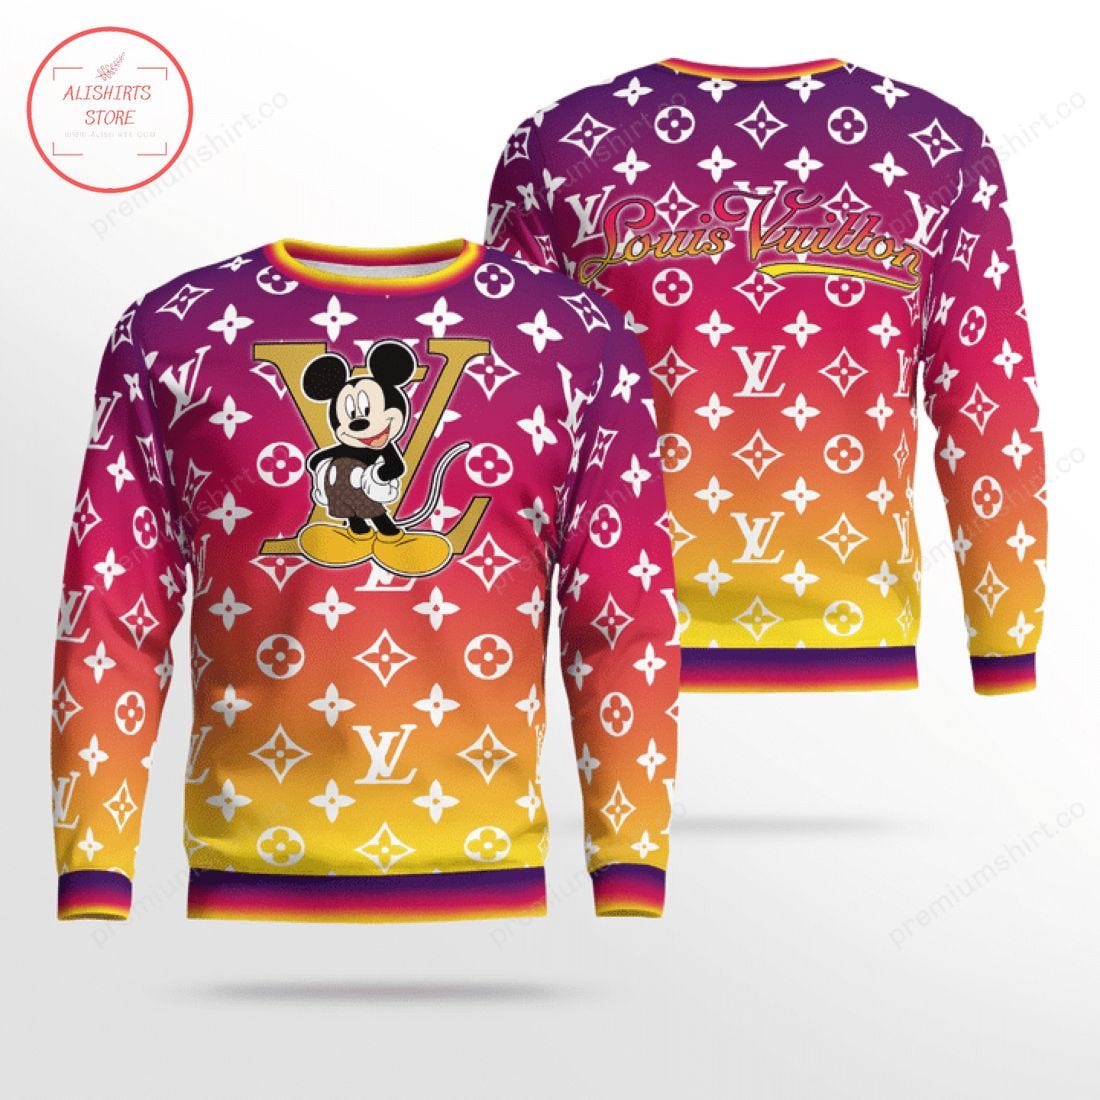 LOUIS VUITTON LV MICKEY MOUSE UGLY CHRISTMAS SWEATER, by responsible level